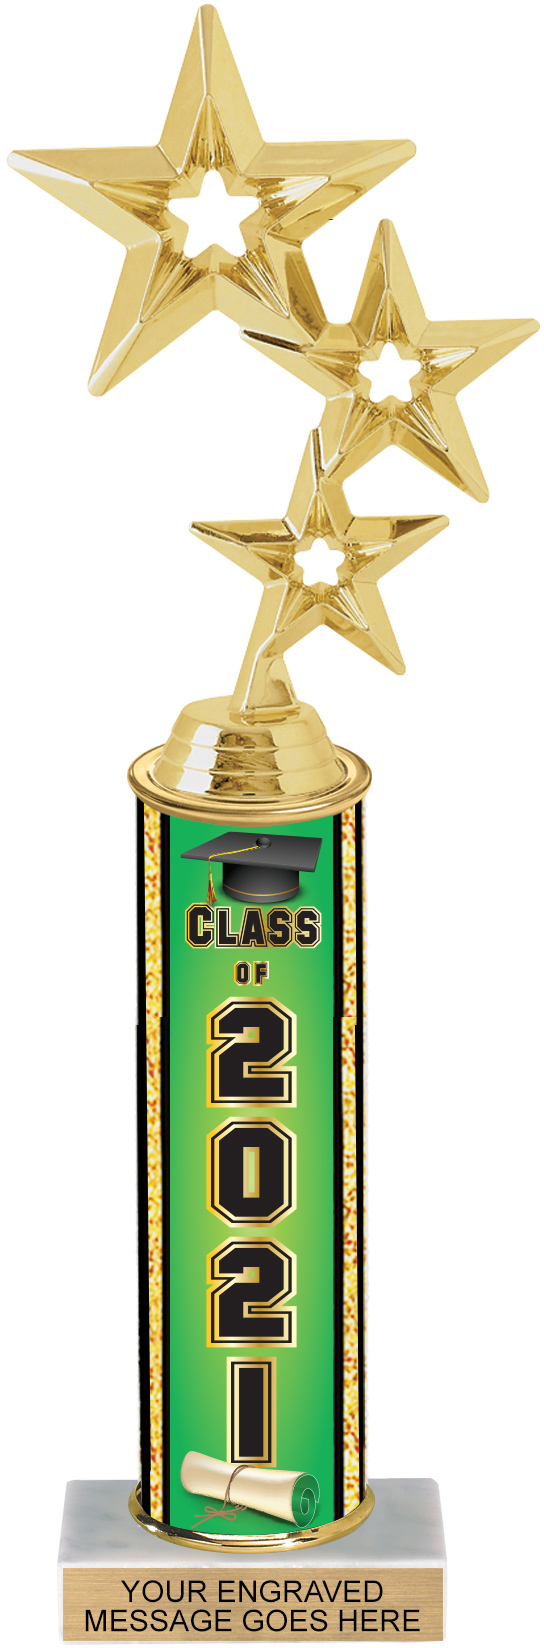 12 inch Class of 2021 Trophy